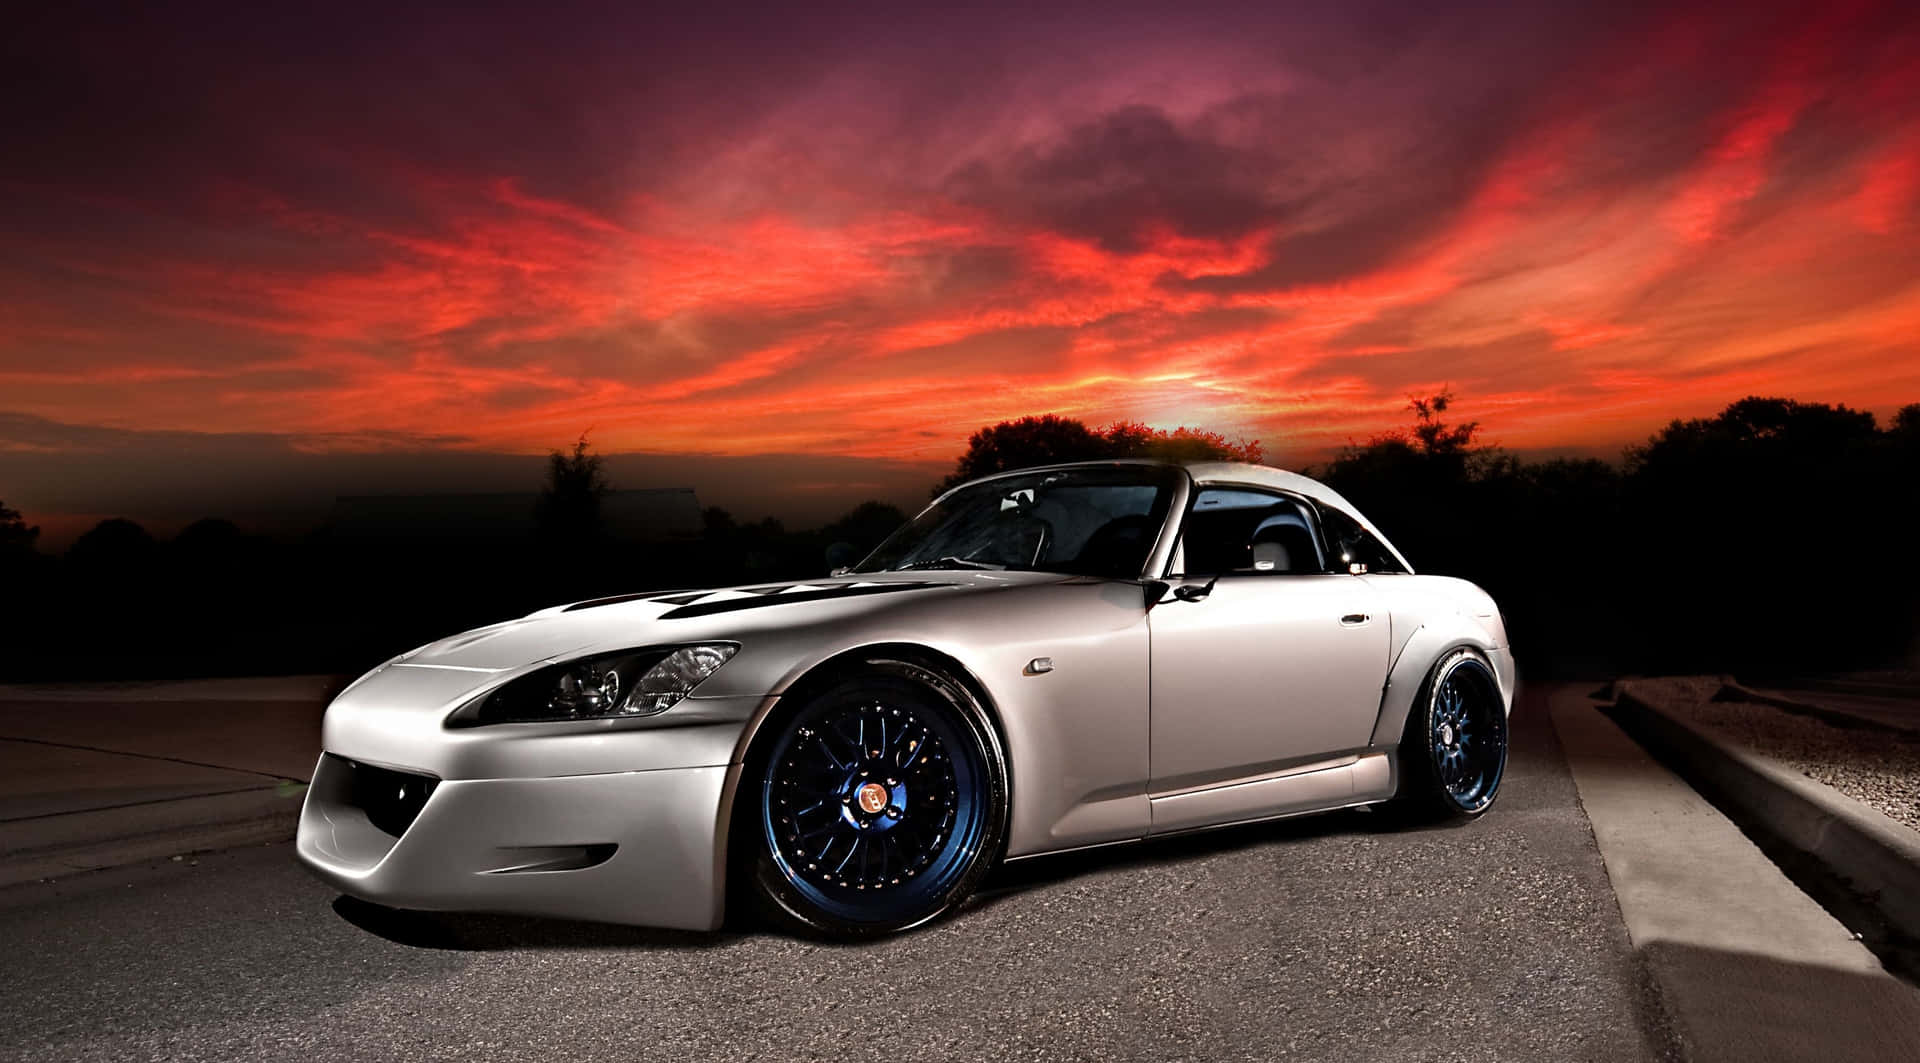 "The Iconic Honda S2000 is Here!" Wallpaper